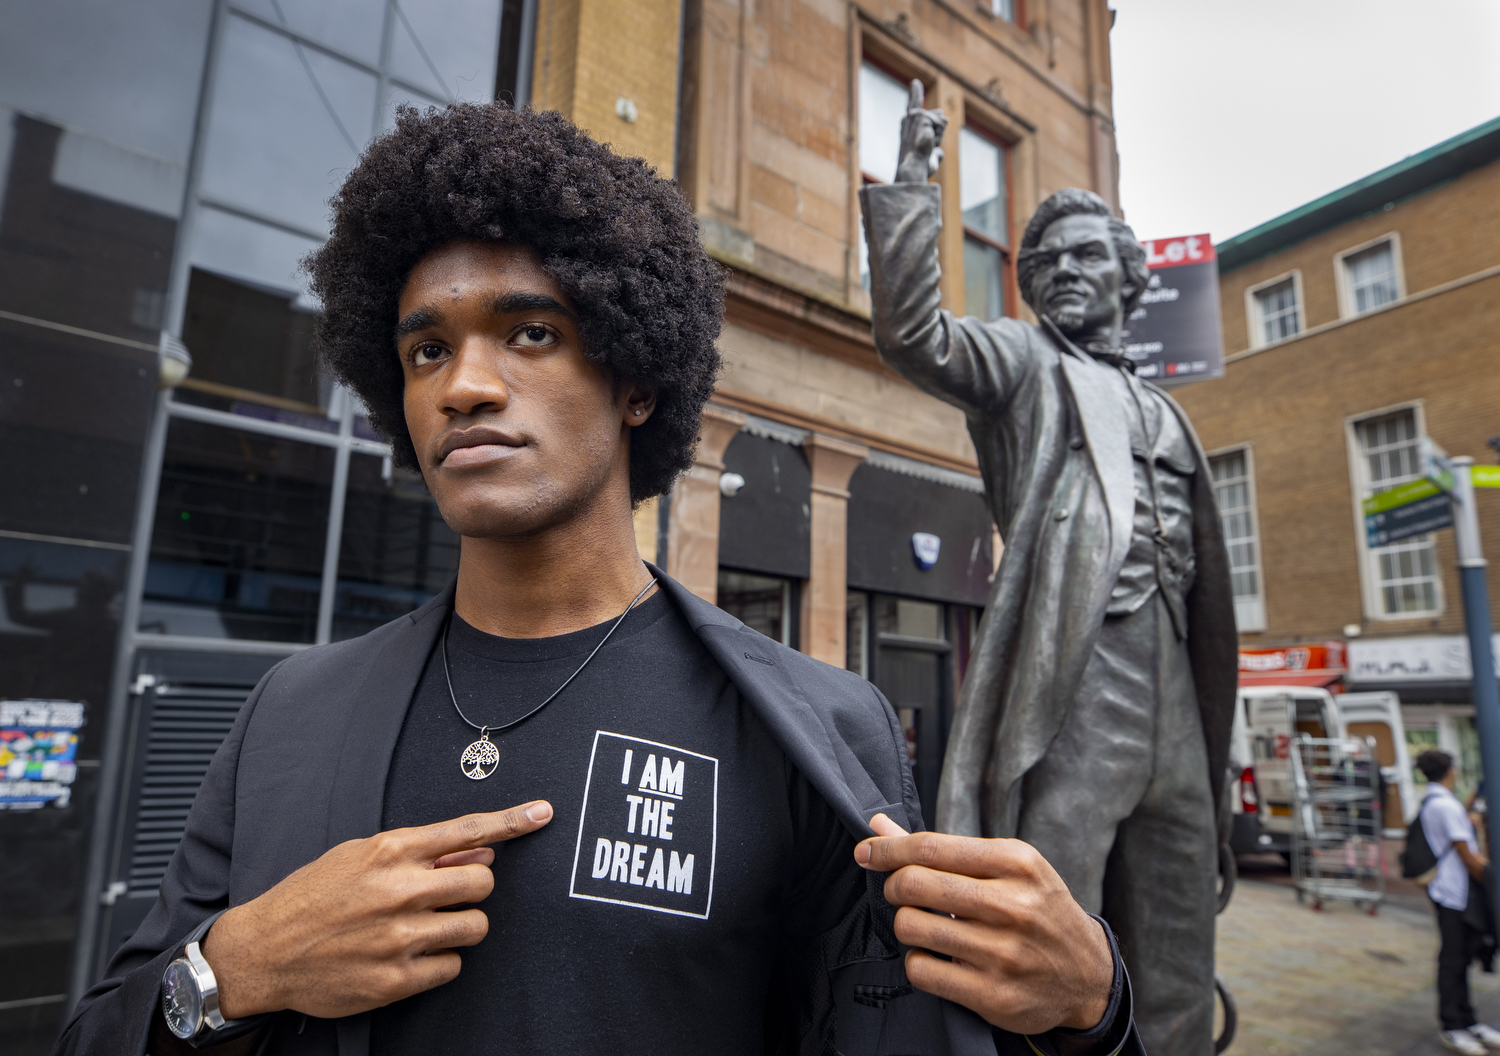 Akil Cole, a US student visiting Belfast as part of his work with the Frederick Douglass Global Fellowship programme